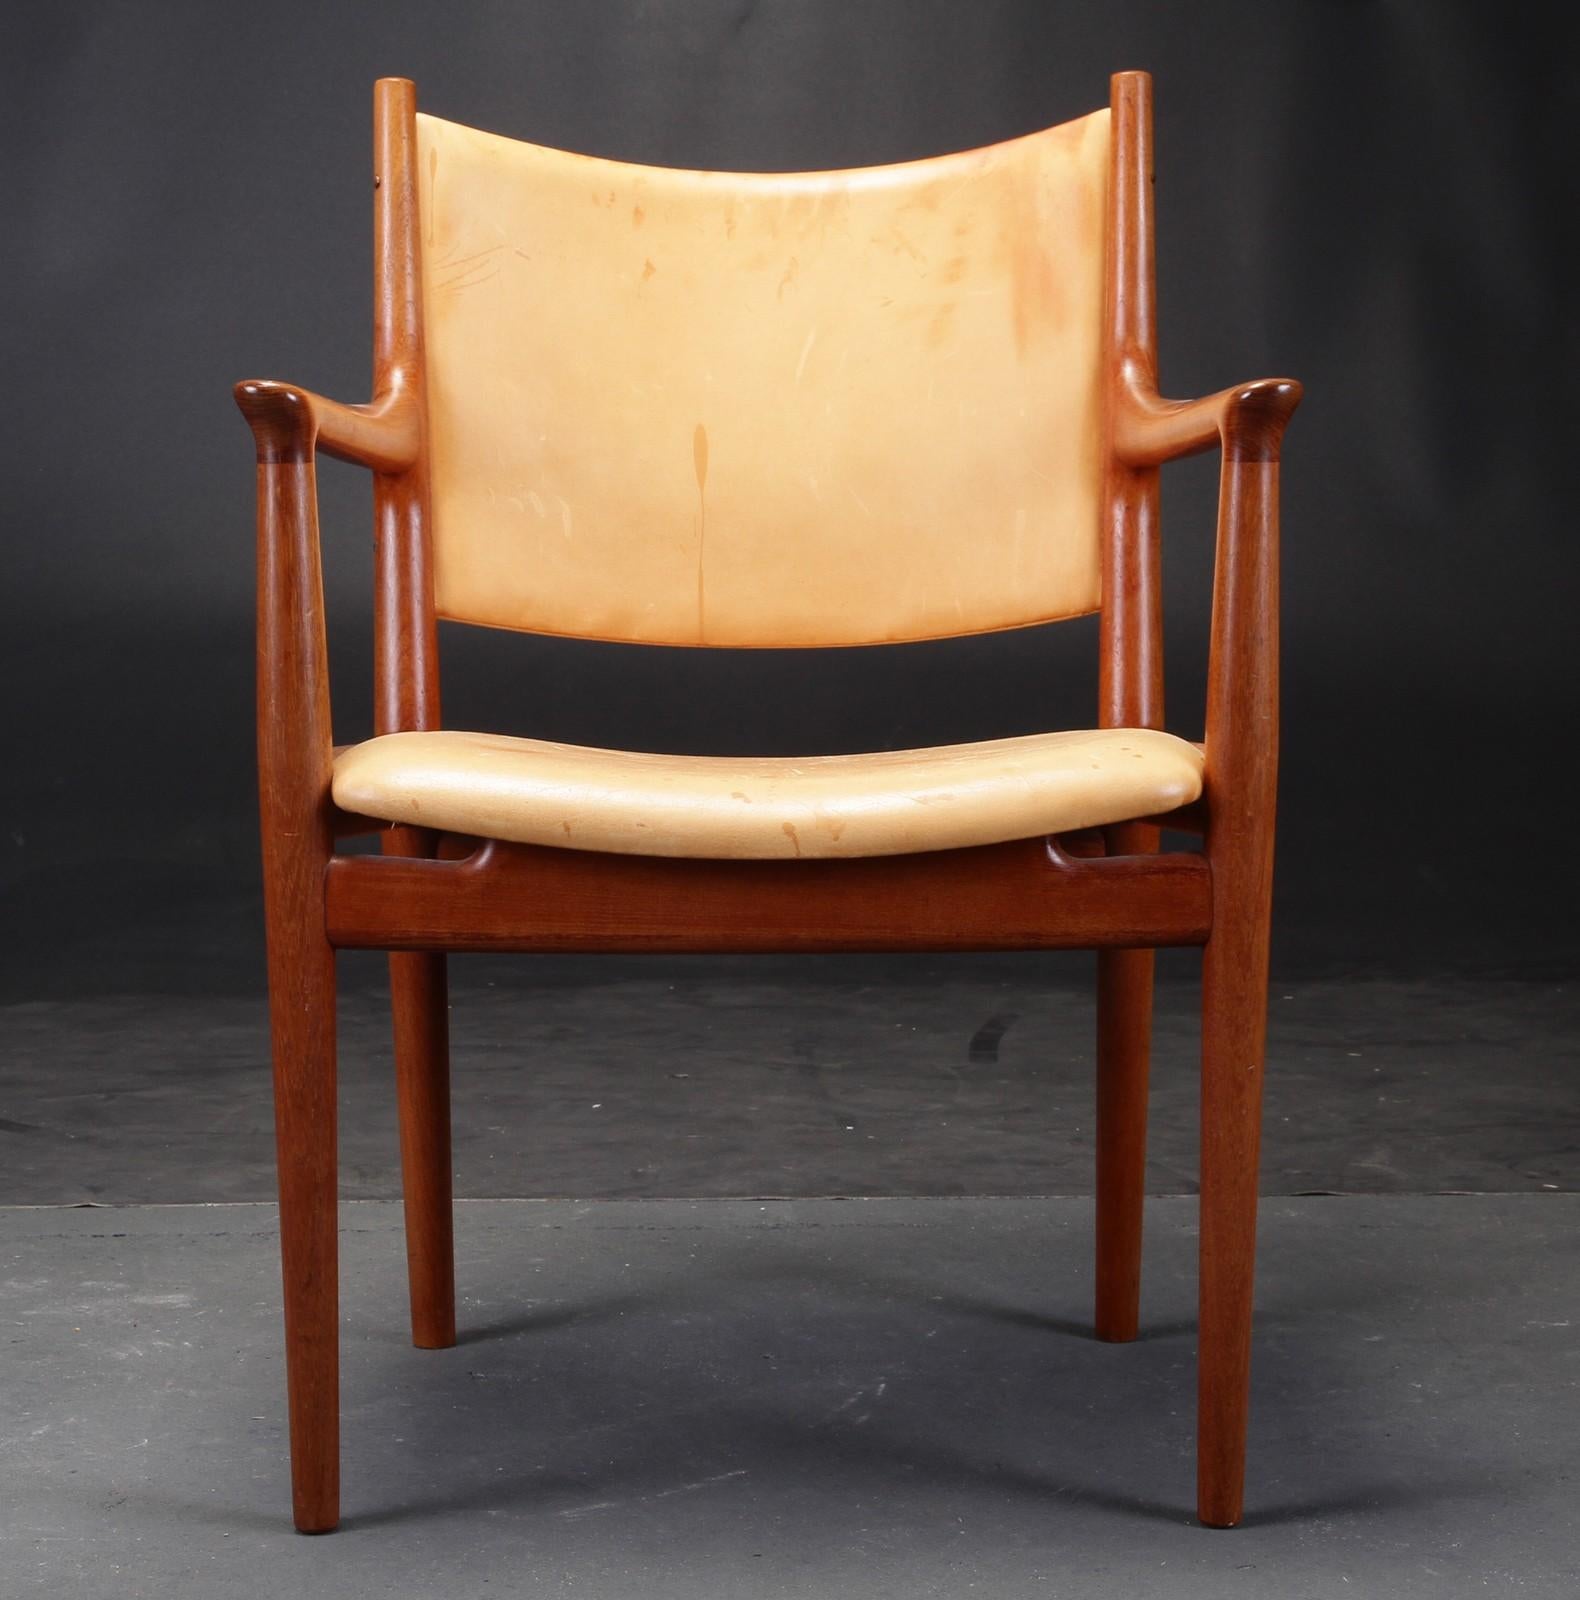 1960s Hans J. Wegner armchair model 713 in tanned patinated oak and leather made by Johannes Hansen.

The chair is evidence of suprime design and craftmanship with its elegant lines and curves and pieces of wood that blend unnoticed into each other